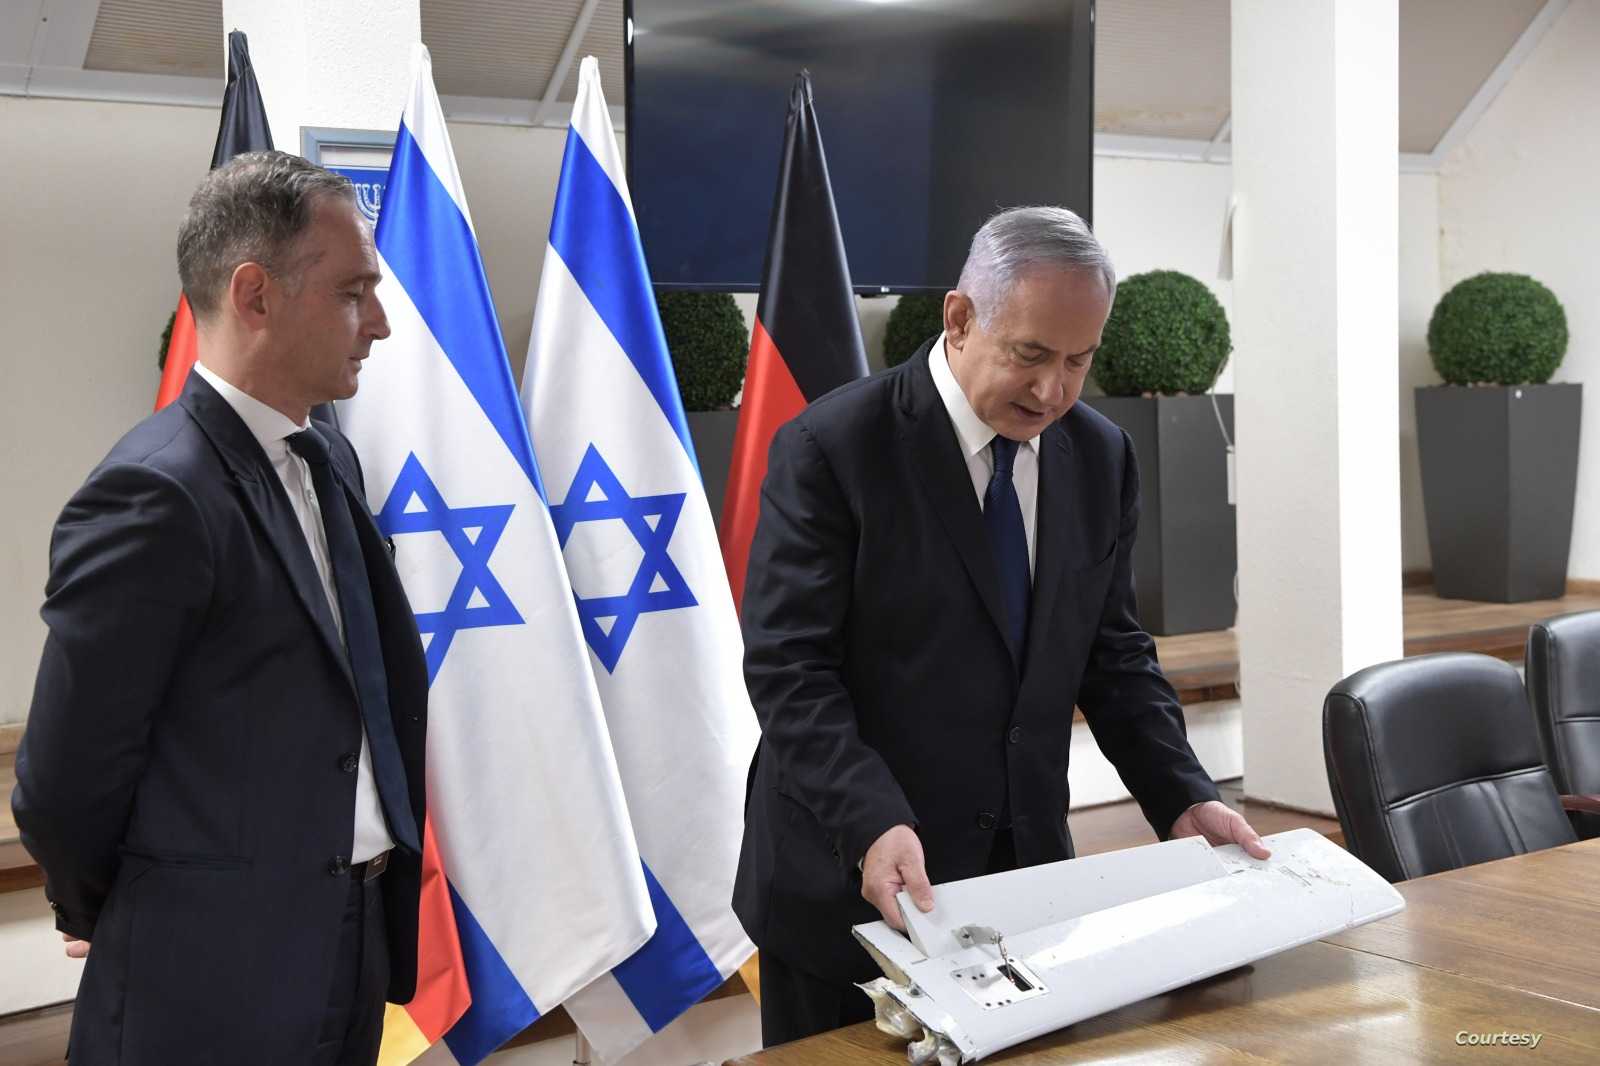 Netanyahu demonstrates parts of an armed UAV sent by Iran